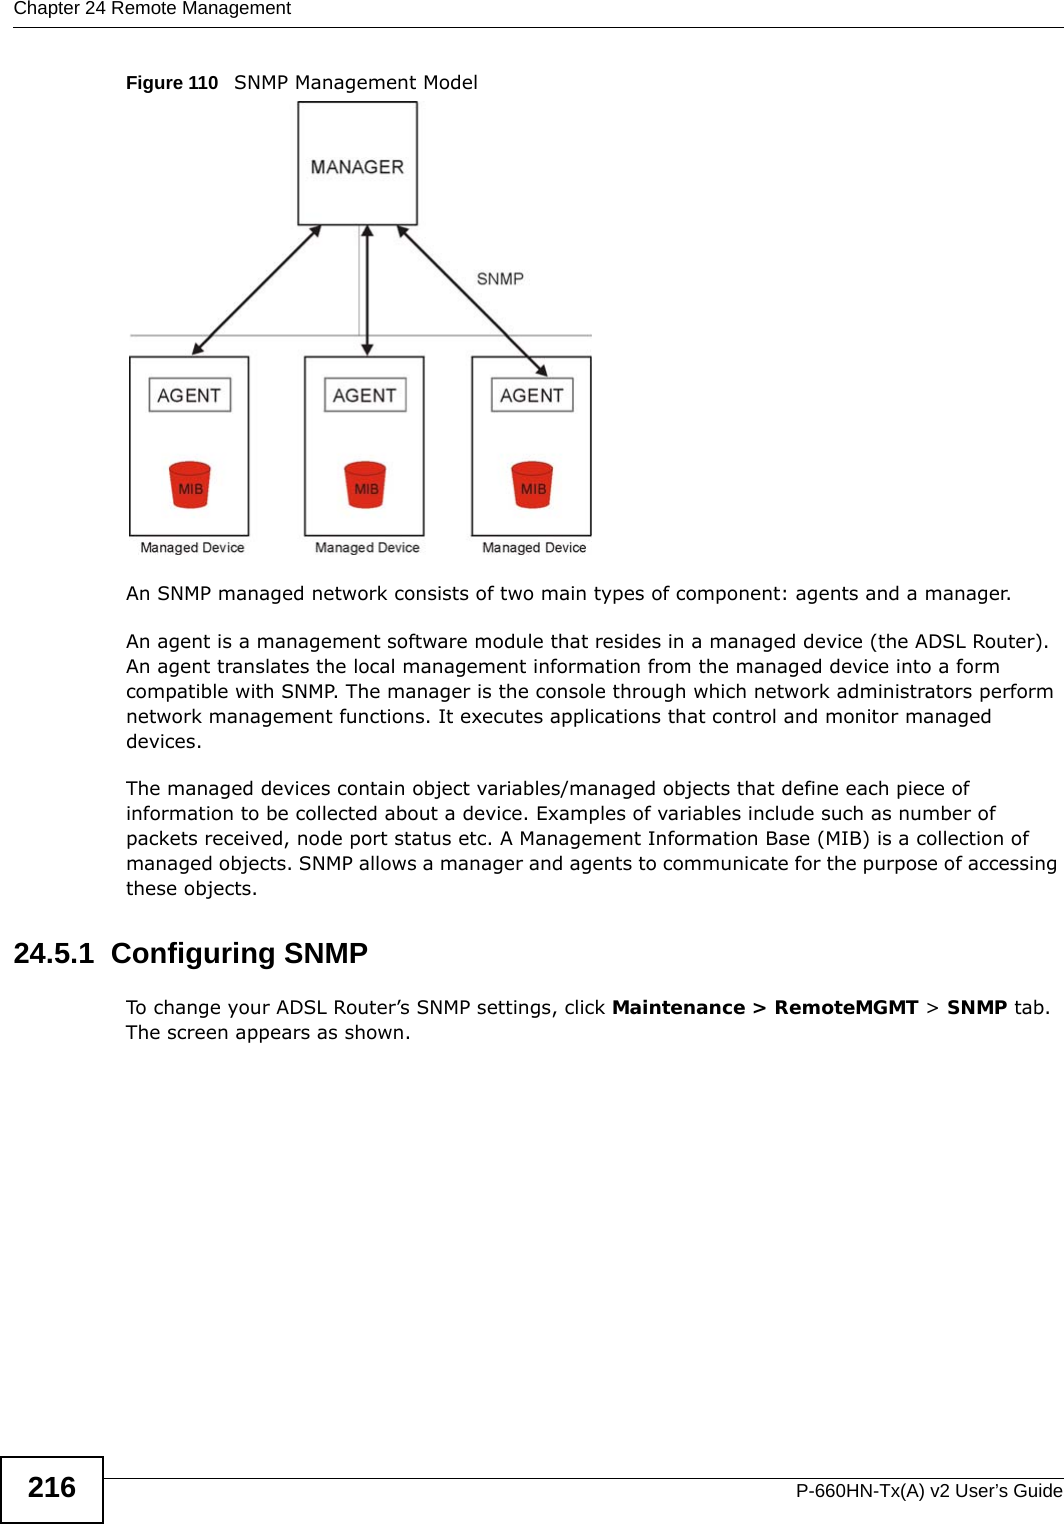 Chapter 24 Remote ManagementP-660HN-Tx(A) v2 User’s Guide216Figure 110   SNMP Management ModelAn SNMP managed network consists of two main types of component: agents and a manager. An agent is a management software module that resides in a managed device (the ADSL Router). An agent translates the local management information from the managed device into a form compatible with SNMP. The manager is the console through which network administrators perform network management functions. It executes applications that control and monitor managed devices. The managed devices contain object variables/managed objects that define each piece of information to be collected about a device. Examples of variables include such as number of packets received, node port status etc. A Management Information Base (MIB) is a collection of managed objects. SNMP allows a manager and agents to communicate for the purpose of accessing these objects.24.5.1  Configuring SNMP To change your ADSL Router’s SNMP settings, click Maintenance &gt; RemoteMGMT &gt; SNMP tab. The screen appears as shown.